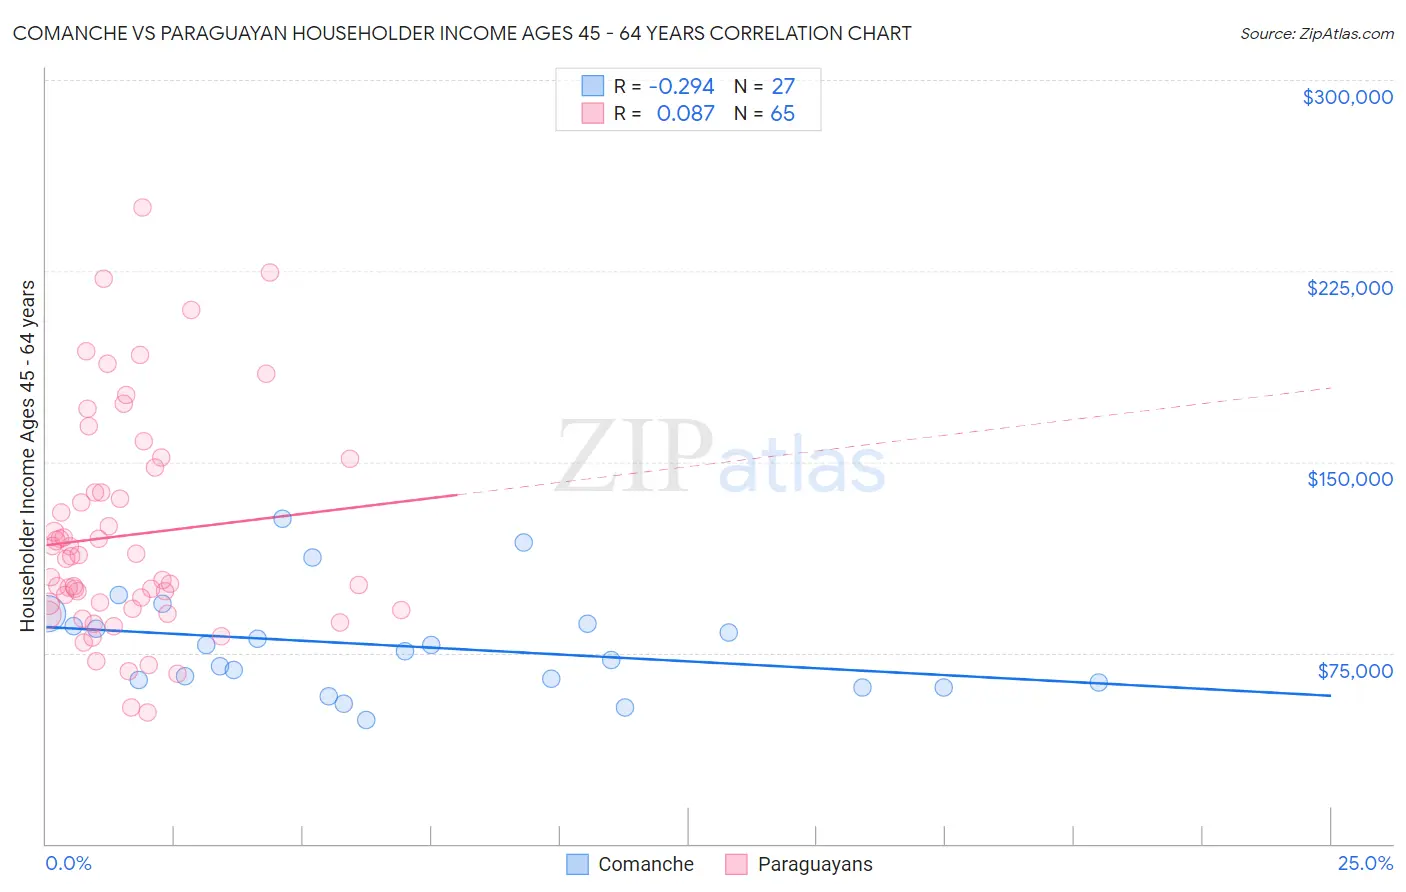 Comanche vs Paraguayan Householder Income Ages 45 - 64 years